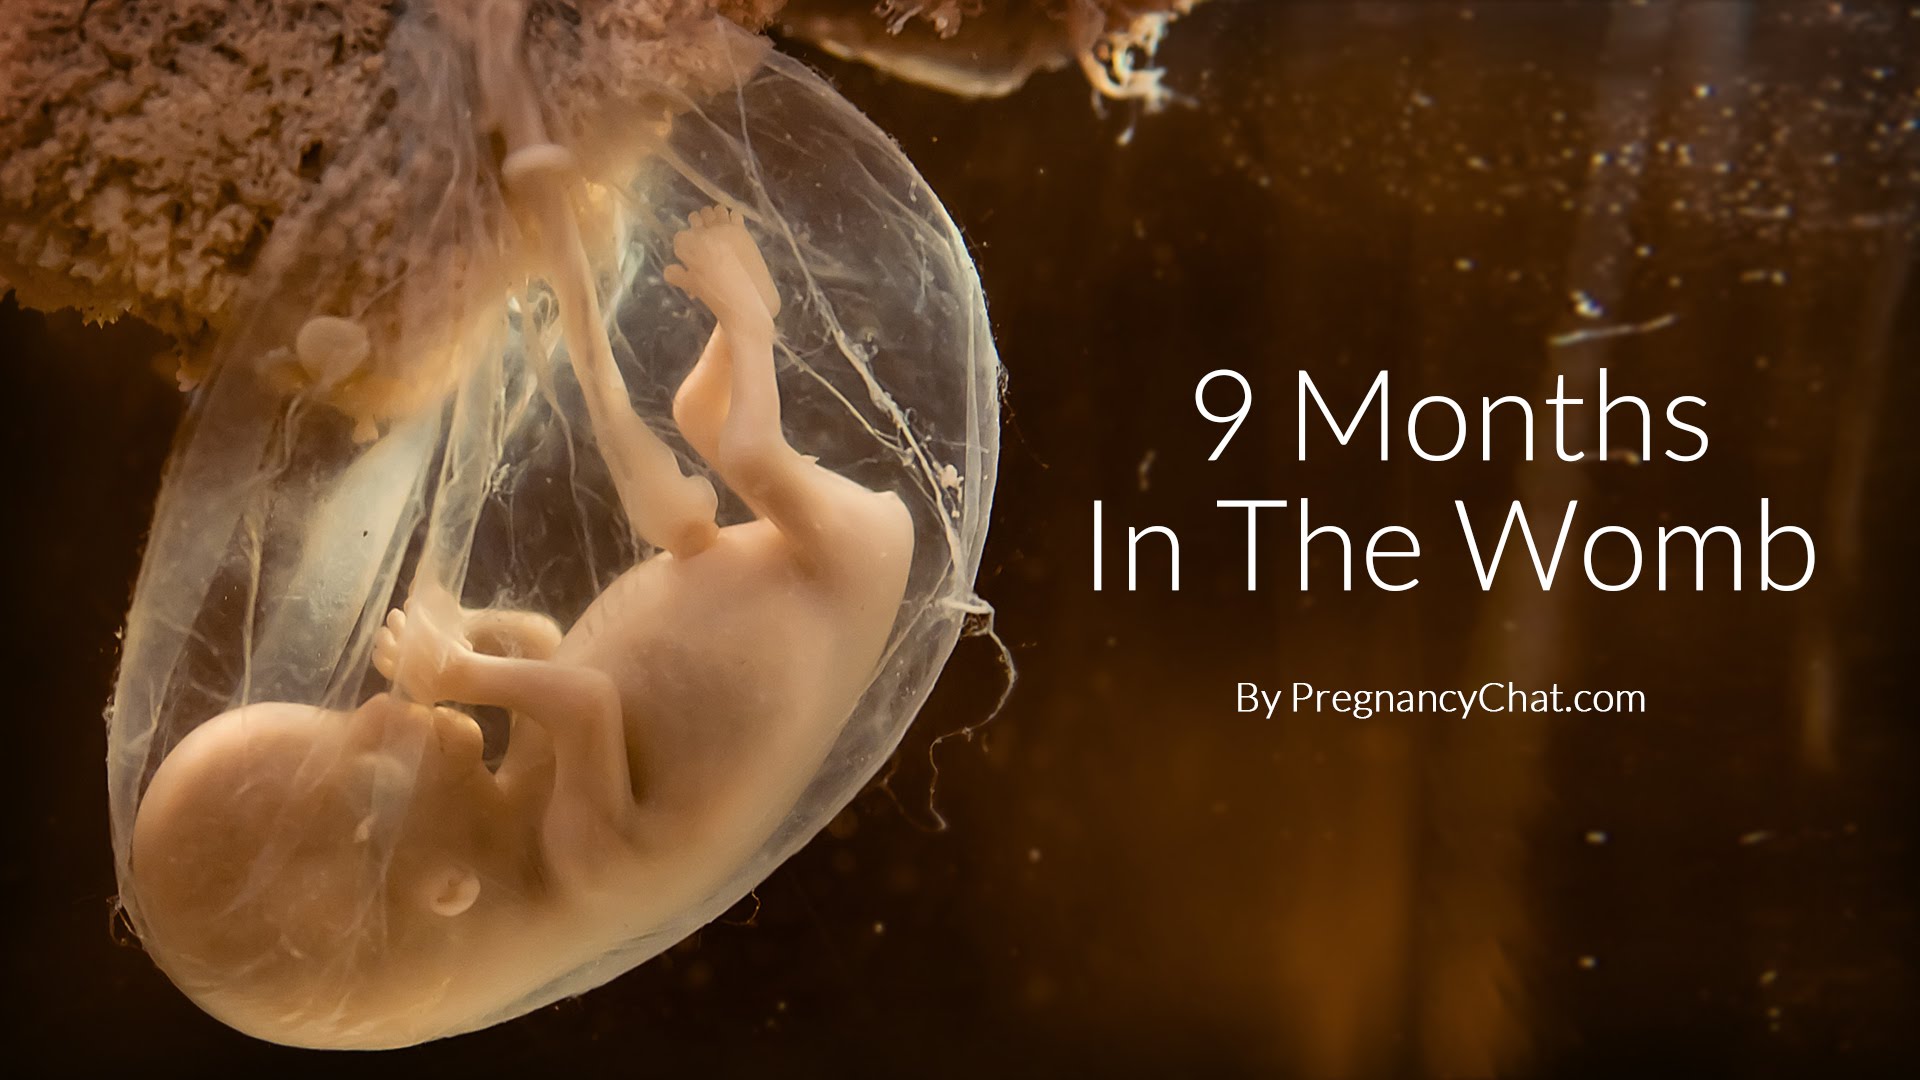 Thumbnail for 9 Months In The Womb